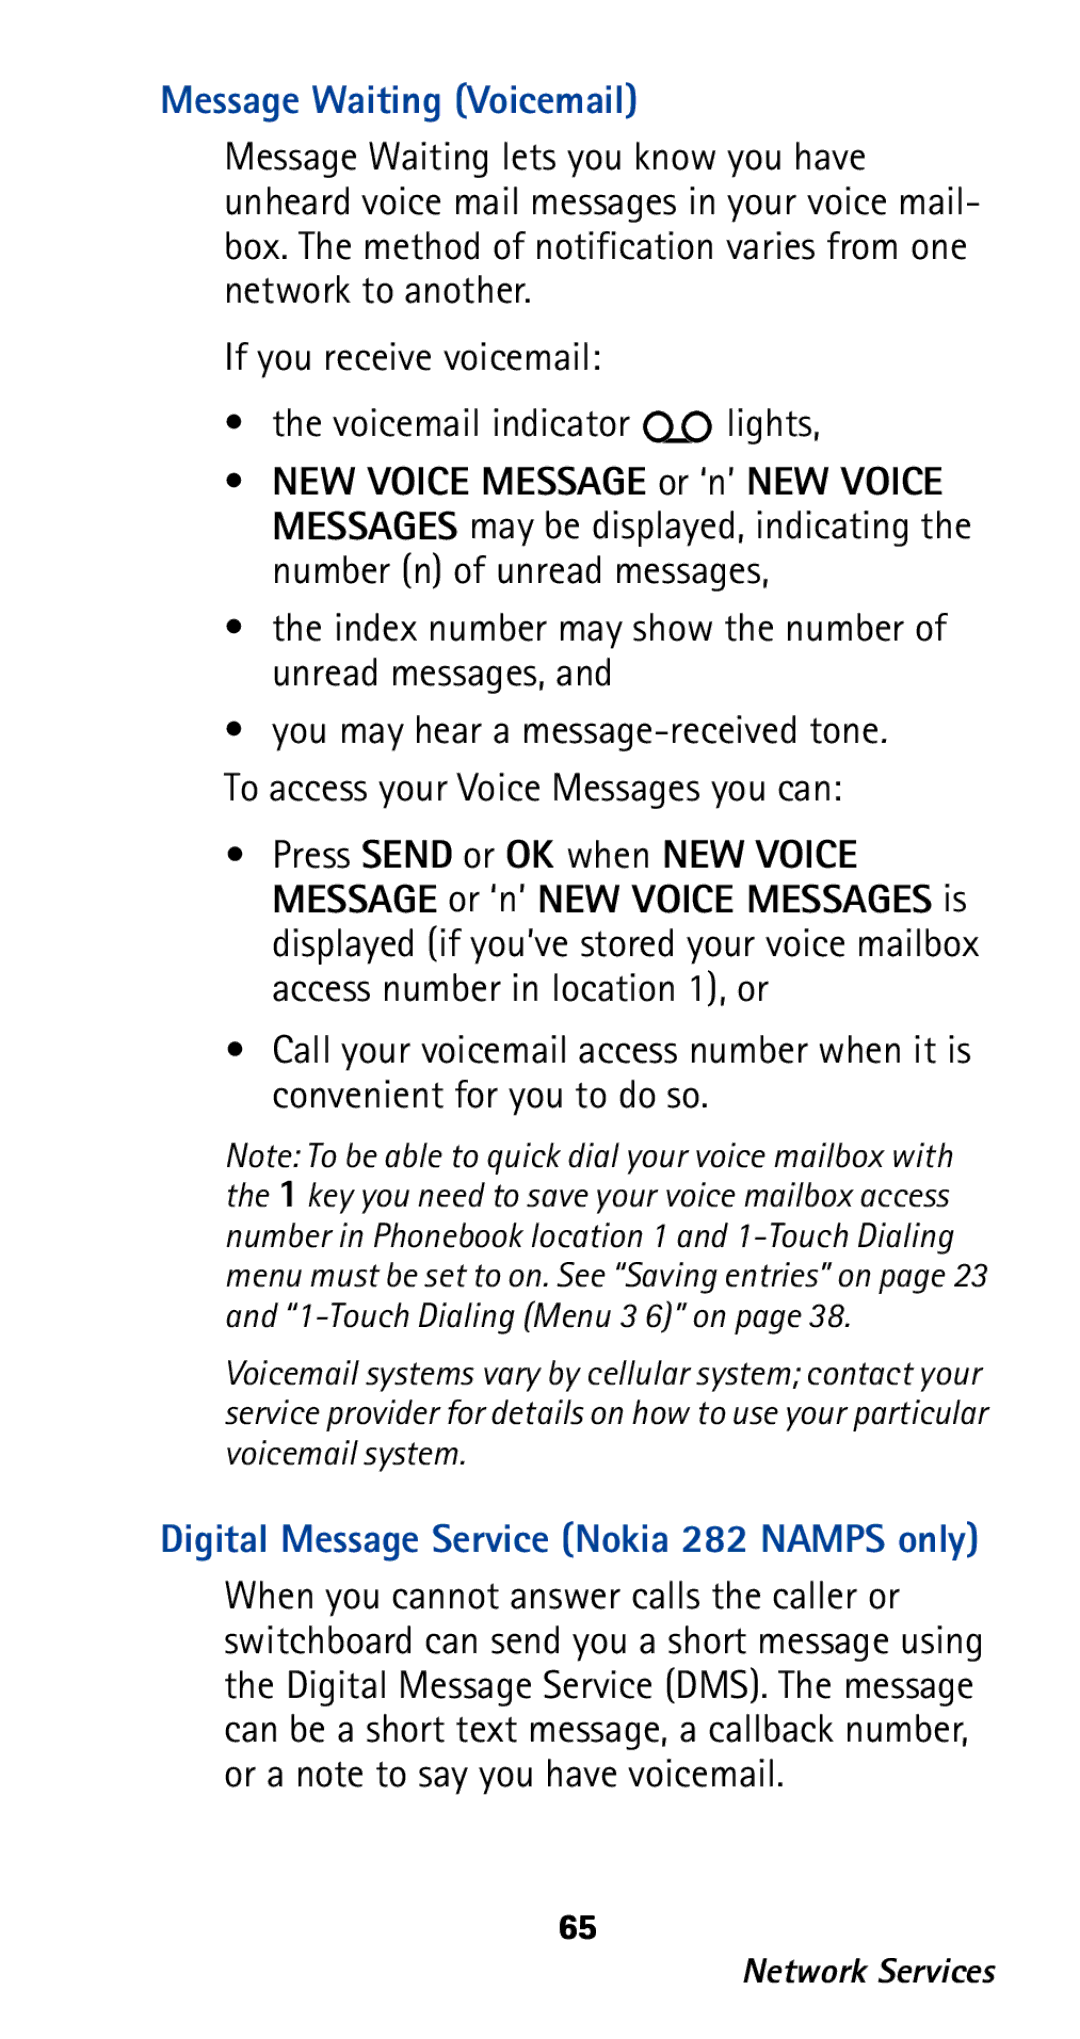 Nokia owner manual Message Waiting Voicemail, Digital Message Service Nokia 282 Namps only 